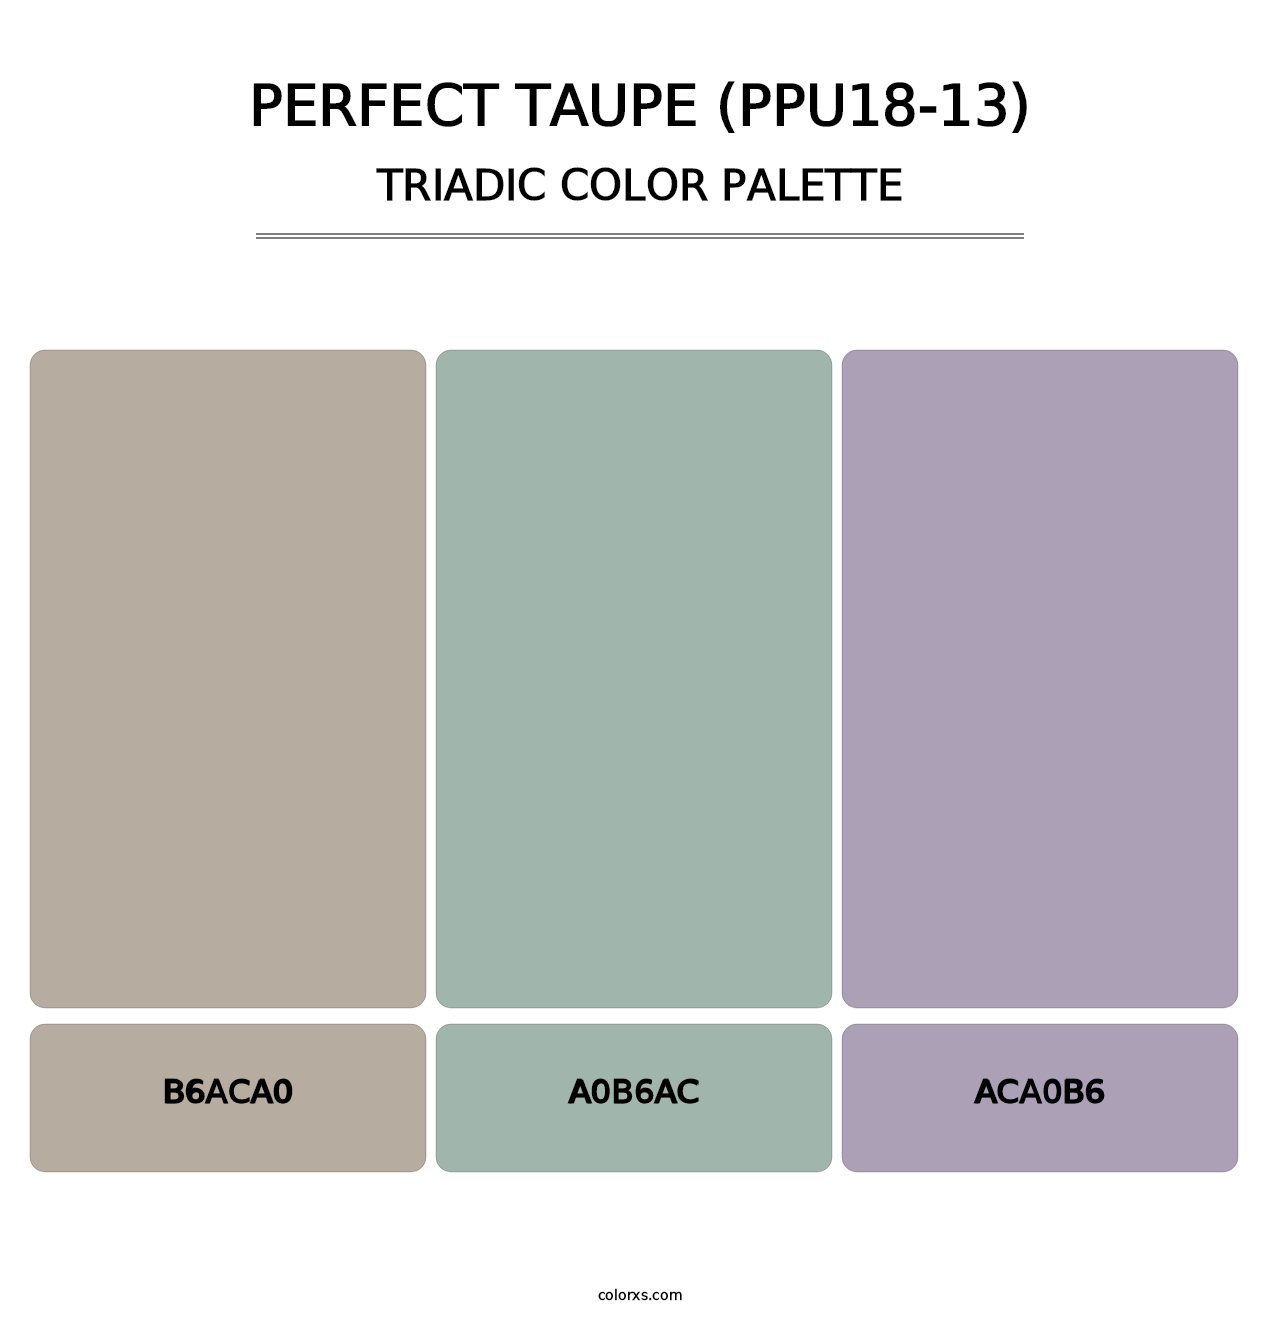 Perfect Taupe (PPU18-13) - Triadic Color Palette